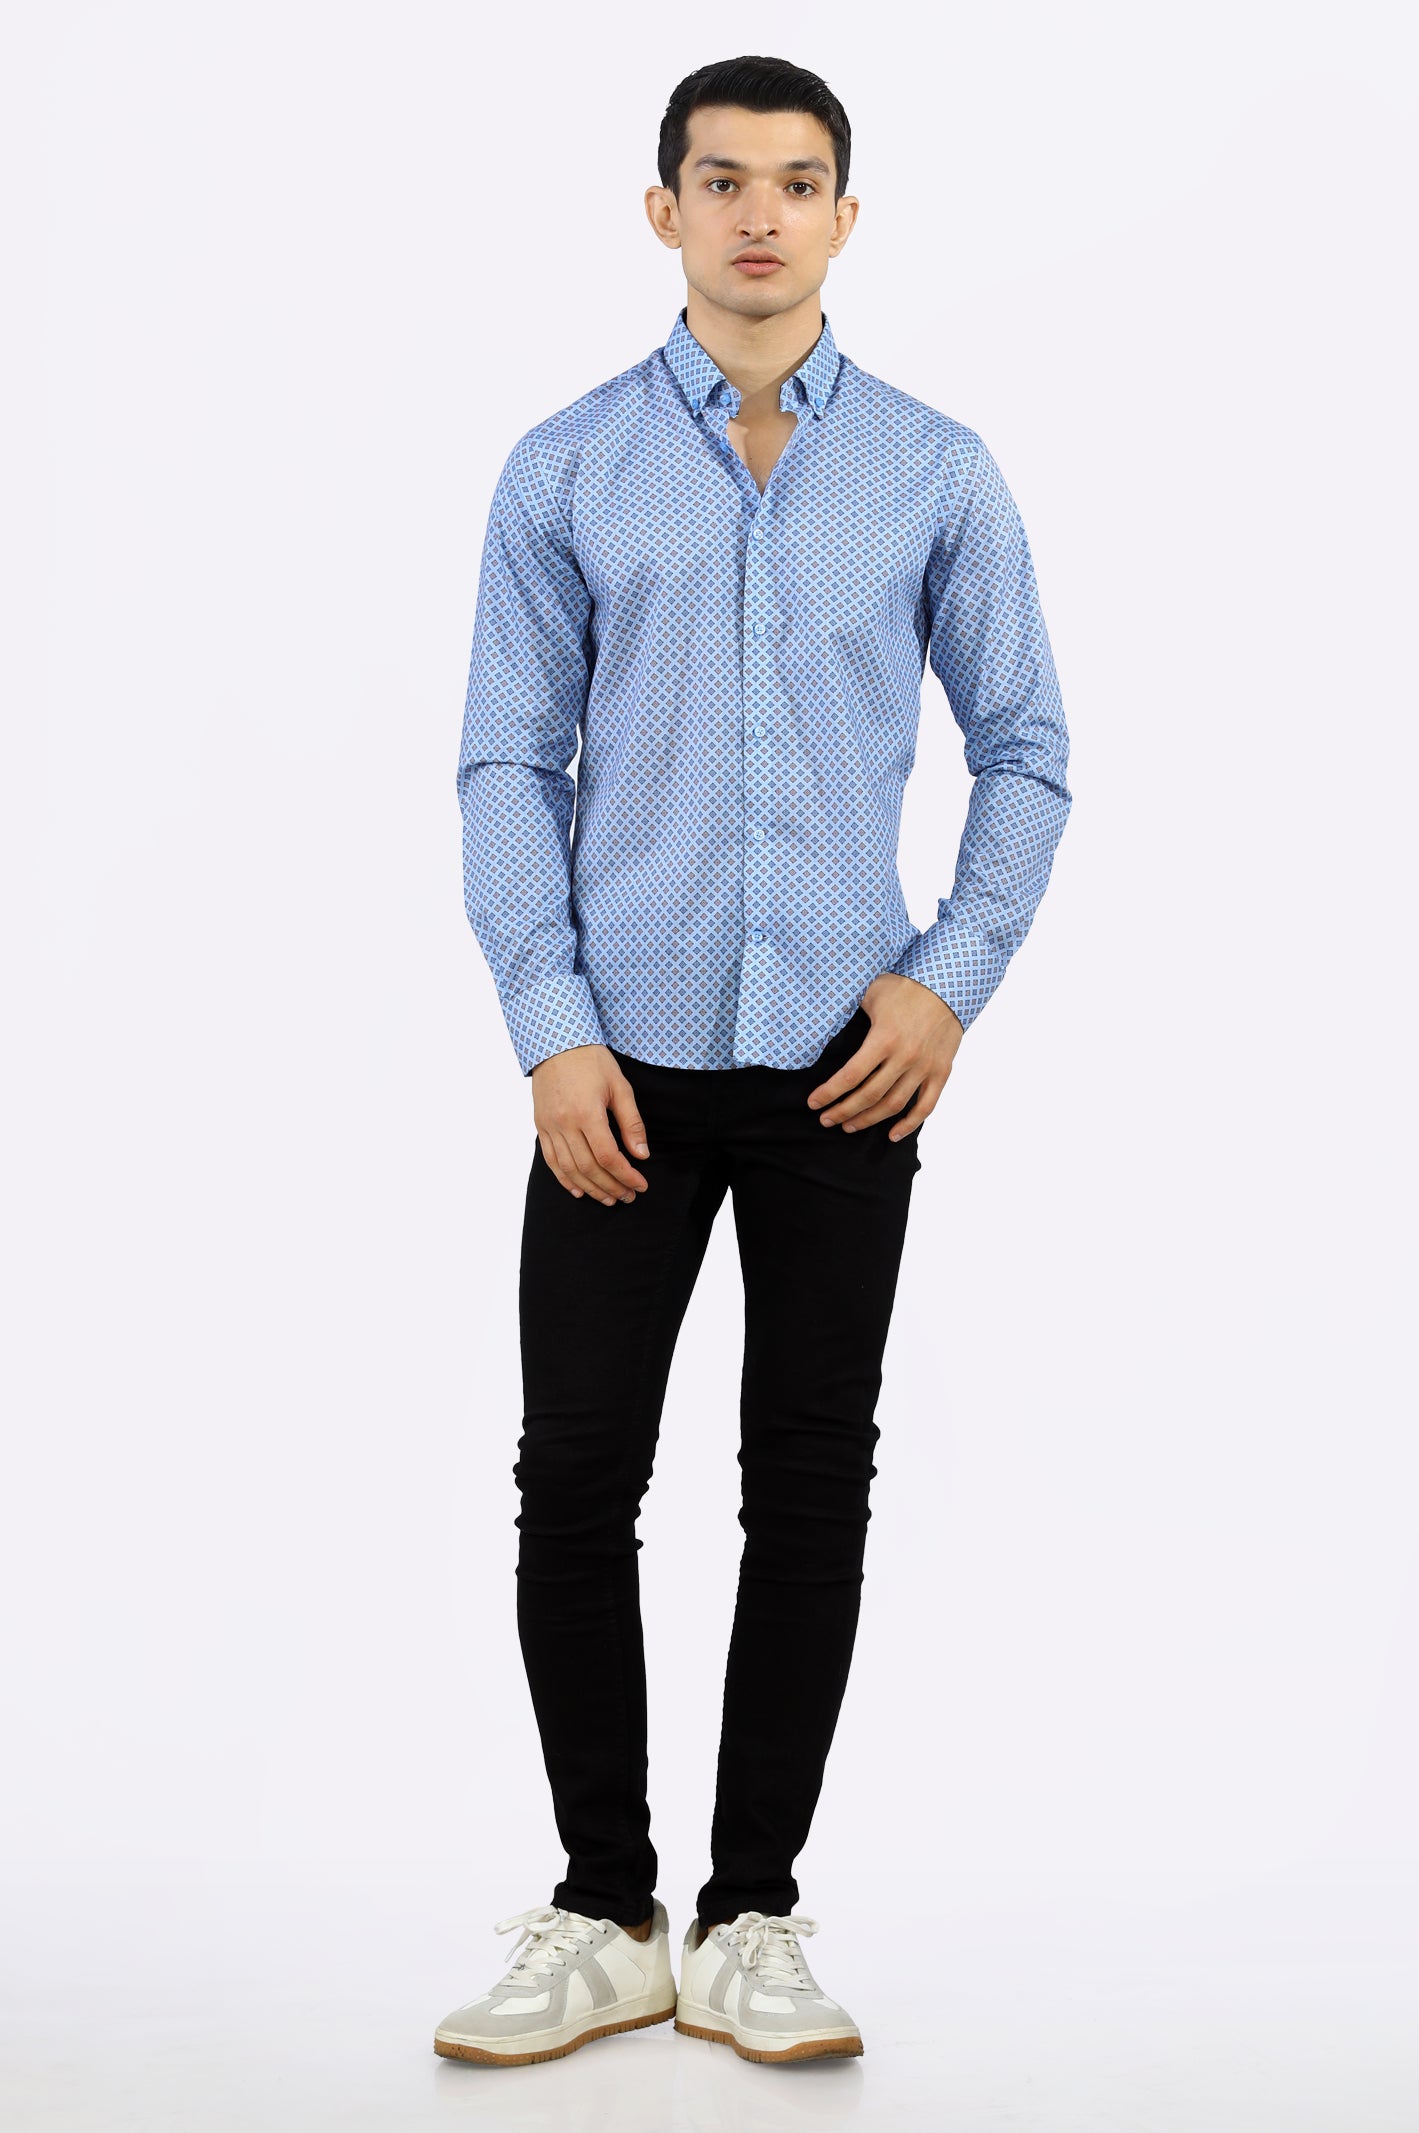 Multicolor Printed Casual Milano Shirt From Diners